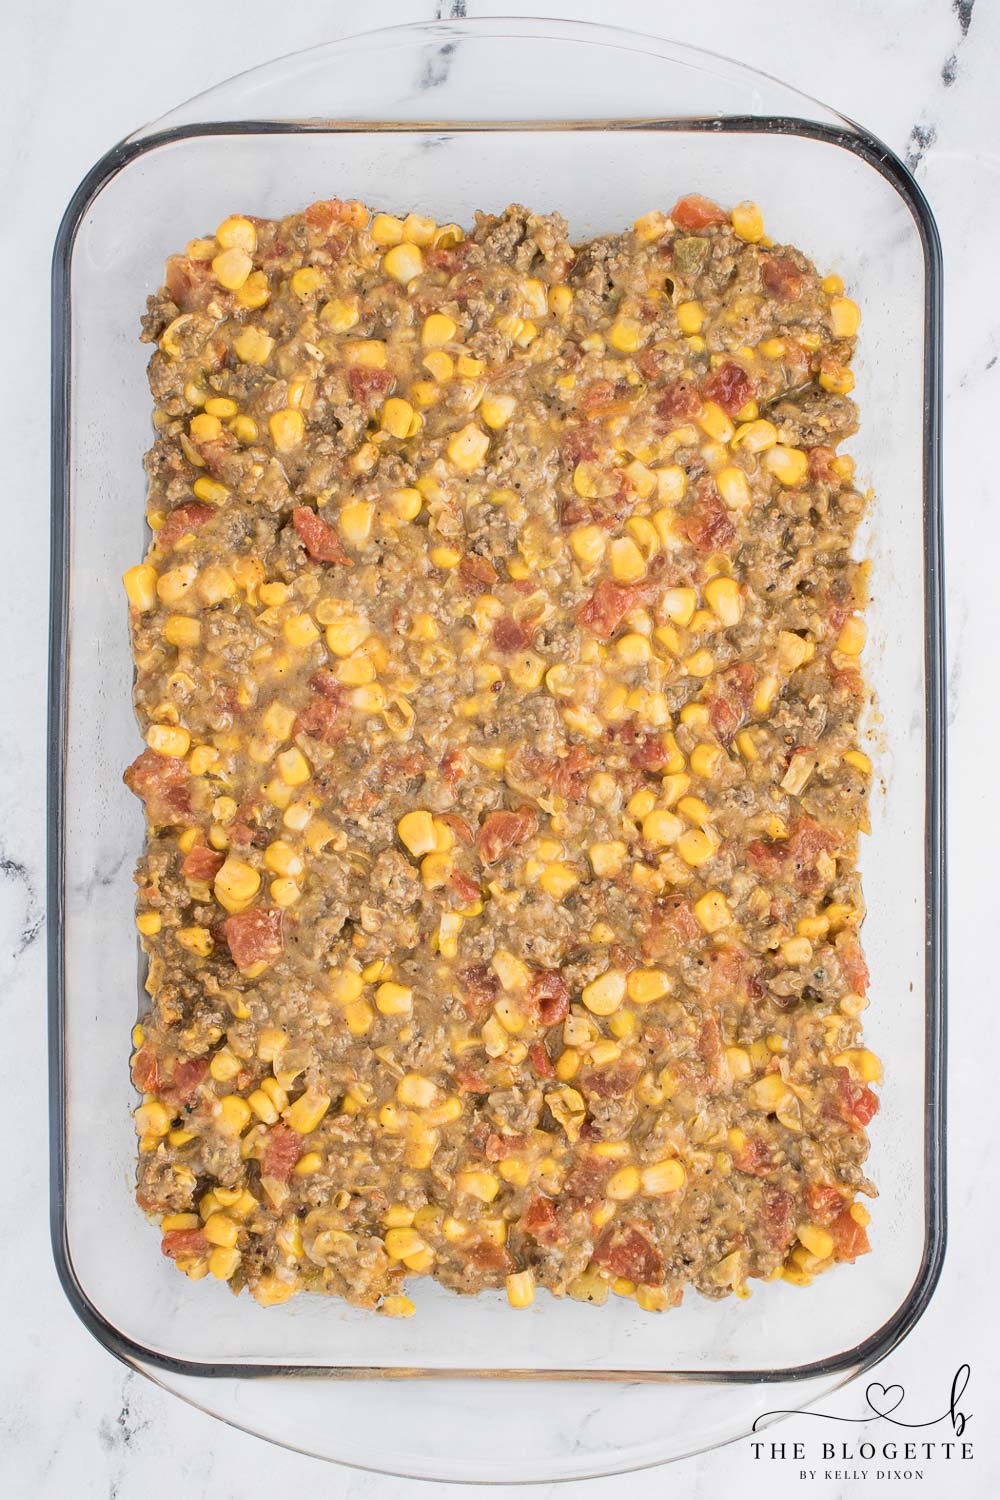 Meat mixture in baking dish